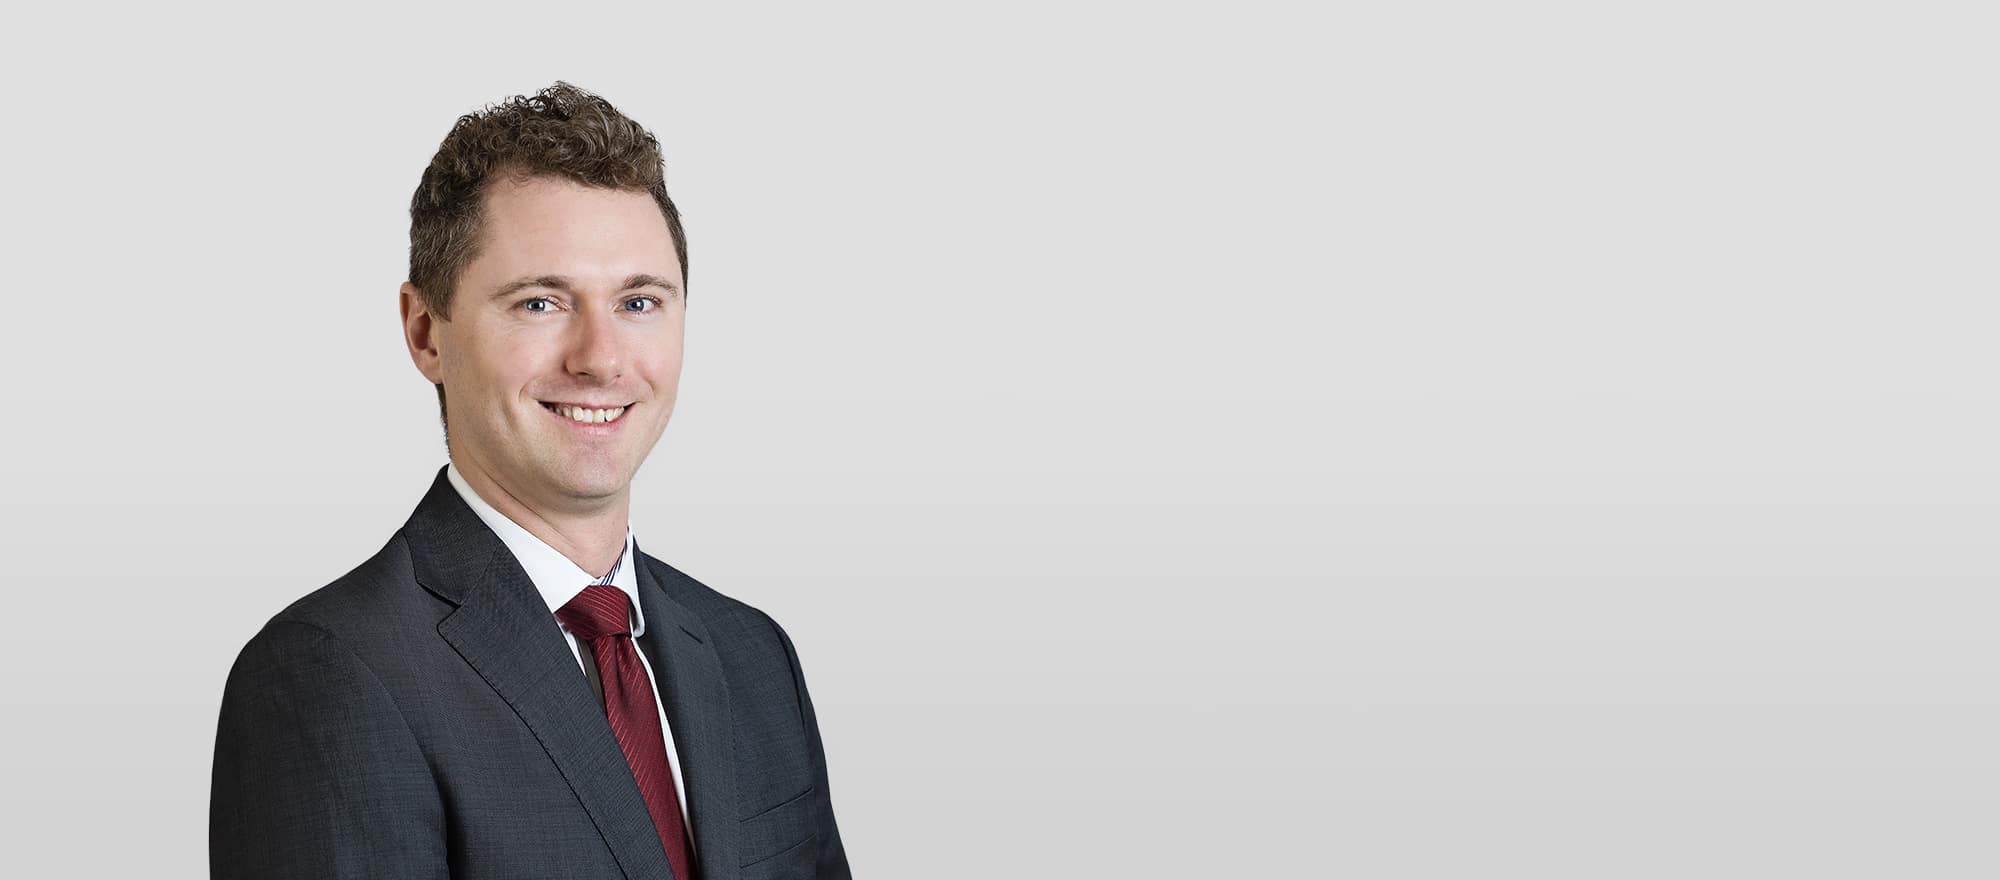 Michael Readshaw is a lawyer at Alexander Holburn, a Vancouver law firm